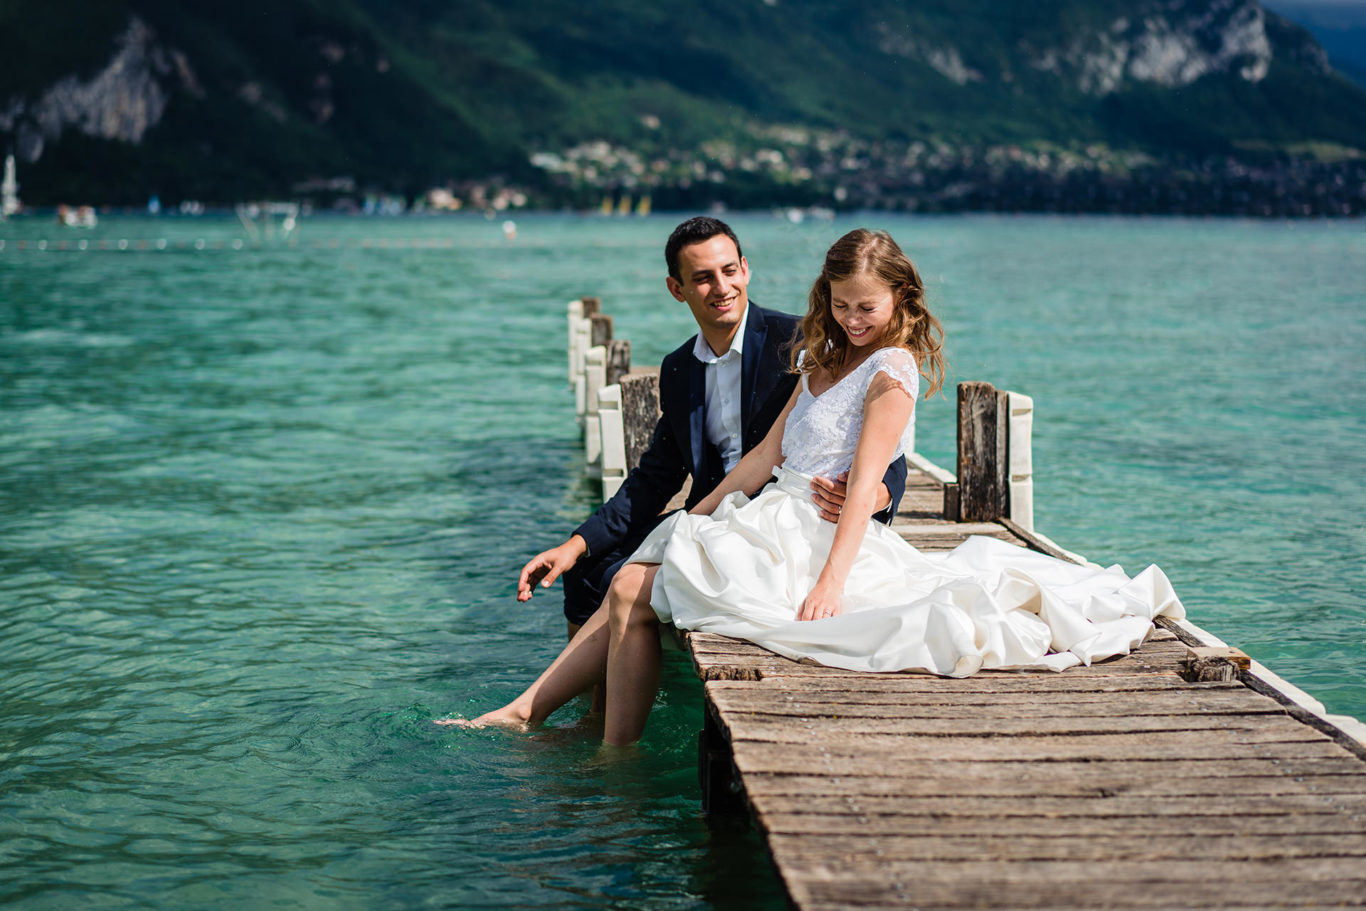 Love the Dress - Annecy Lake - Mihaela & Guillame